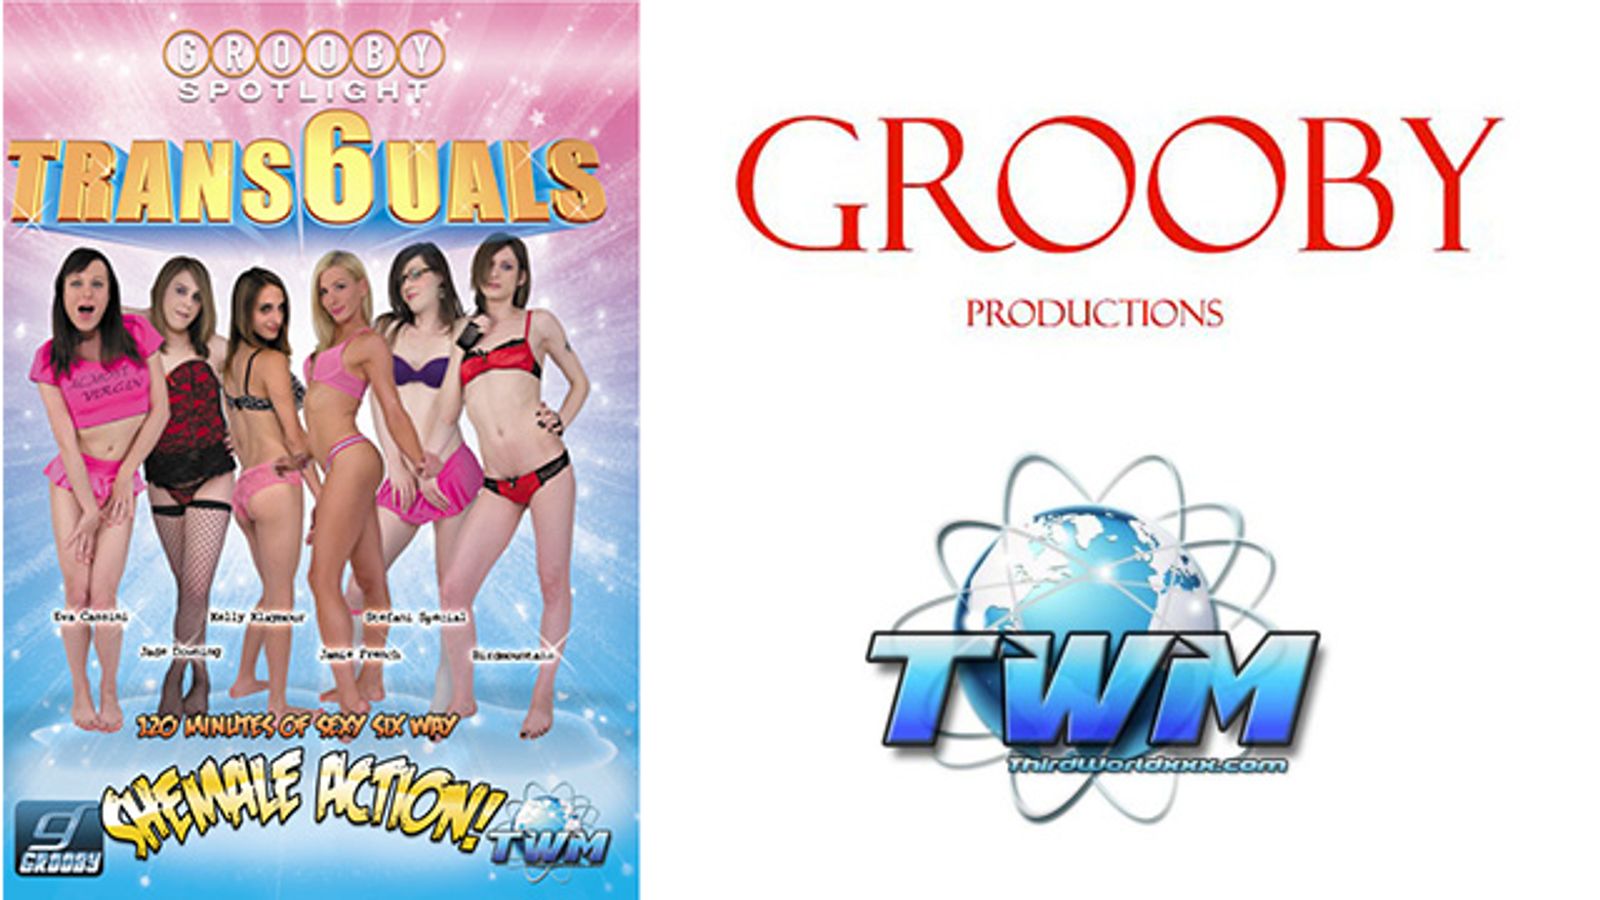 Grooby Spotlight Presents 'Trans6uals' From Deadgirl Productions